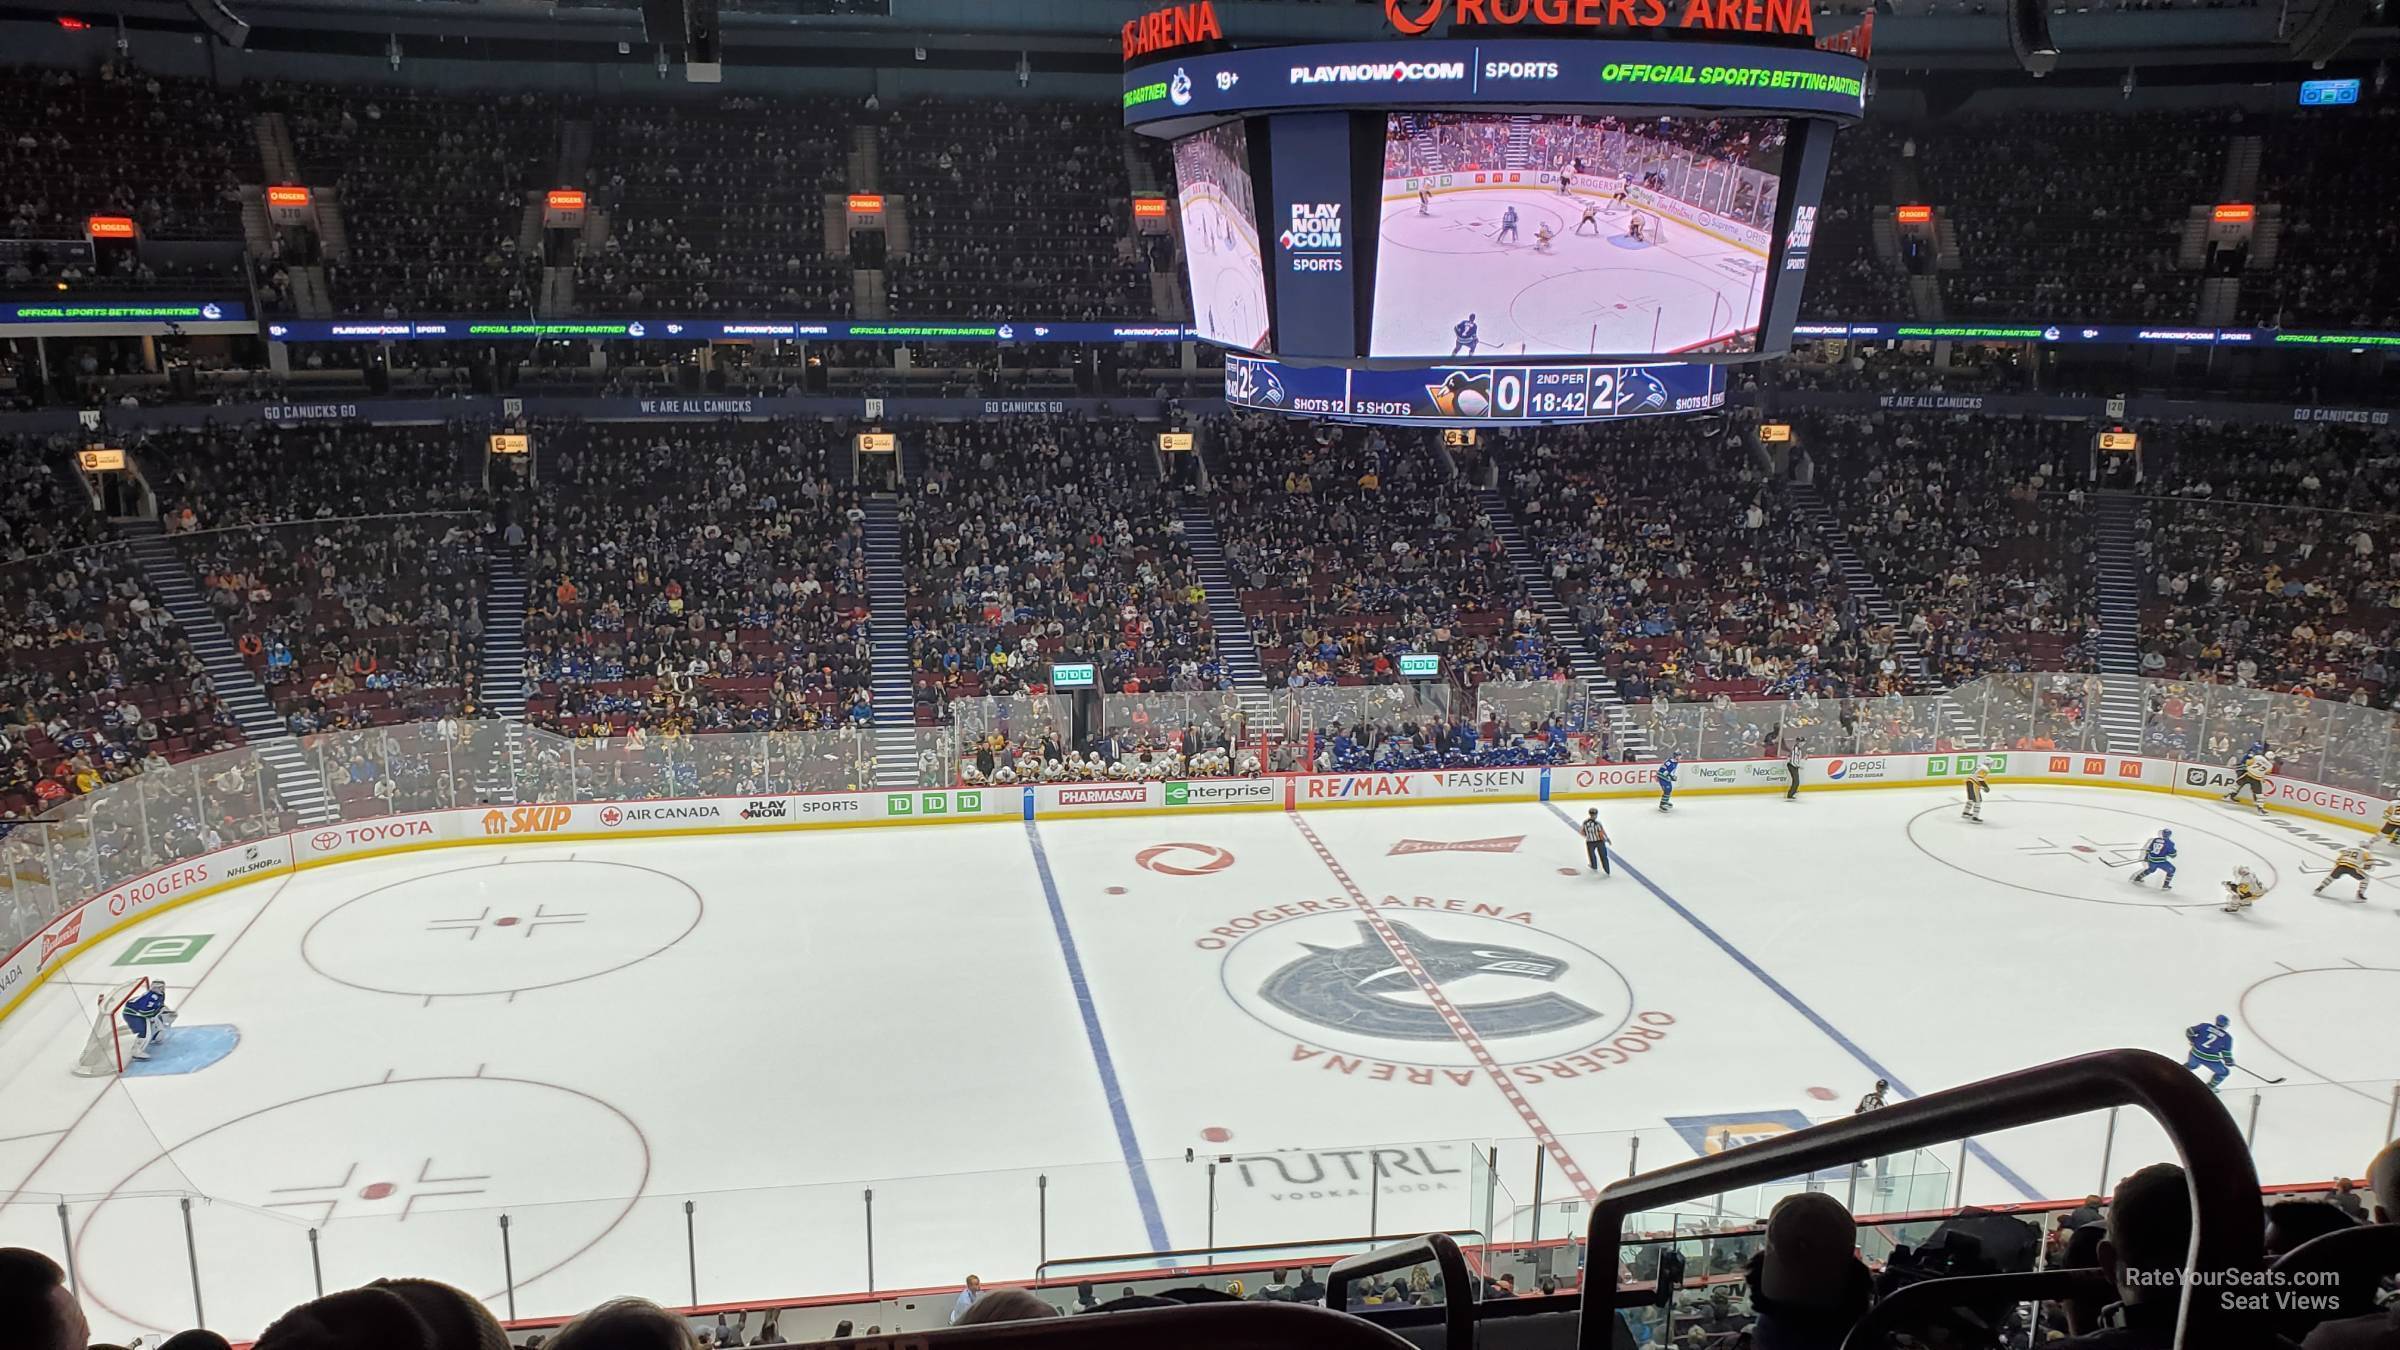 section 309, row 4 seat view  for hockey - rogers arena